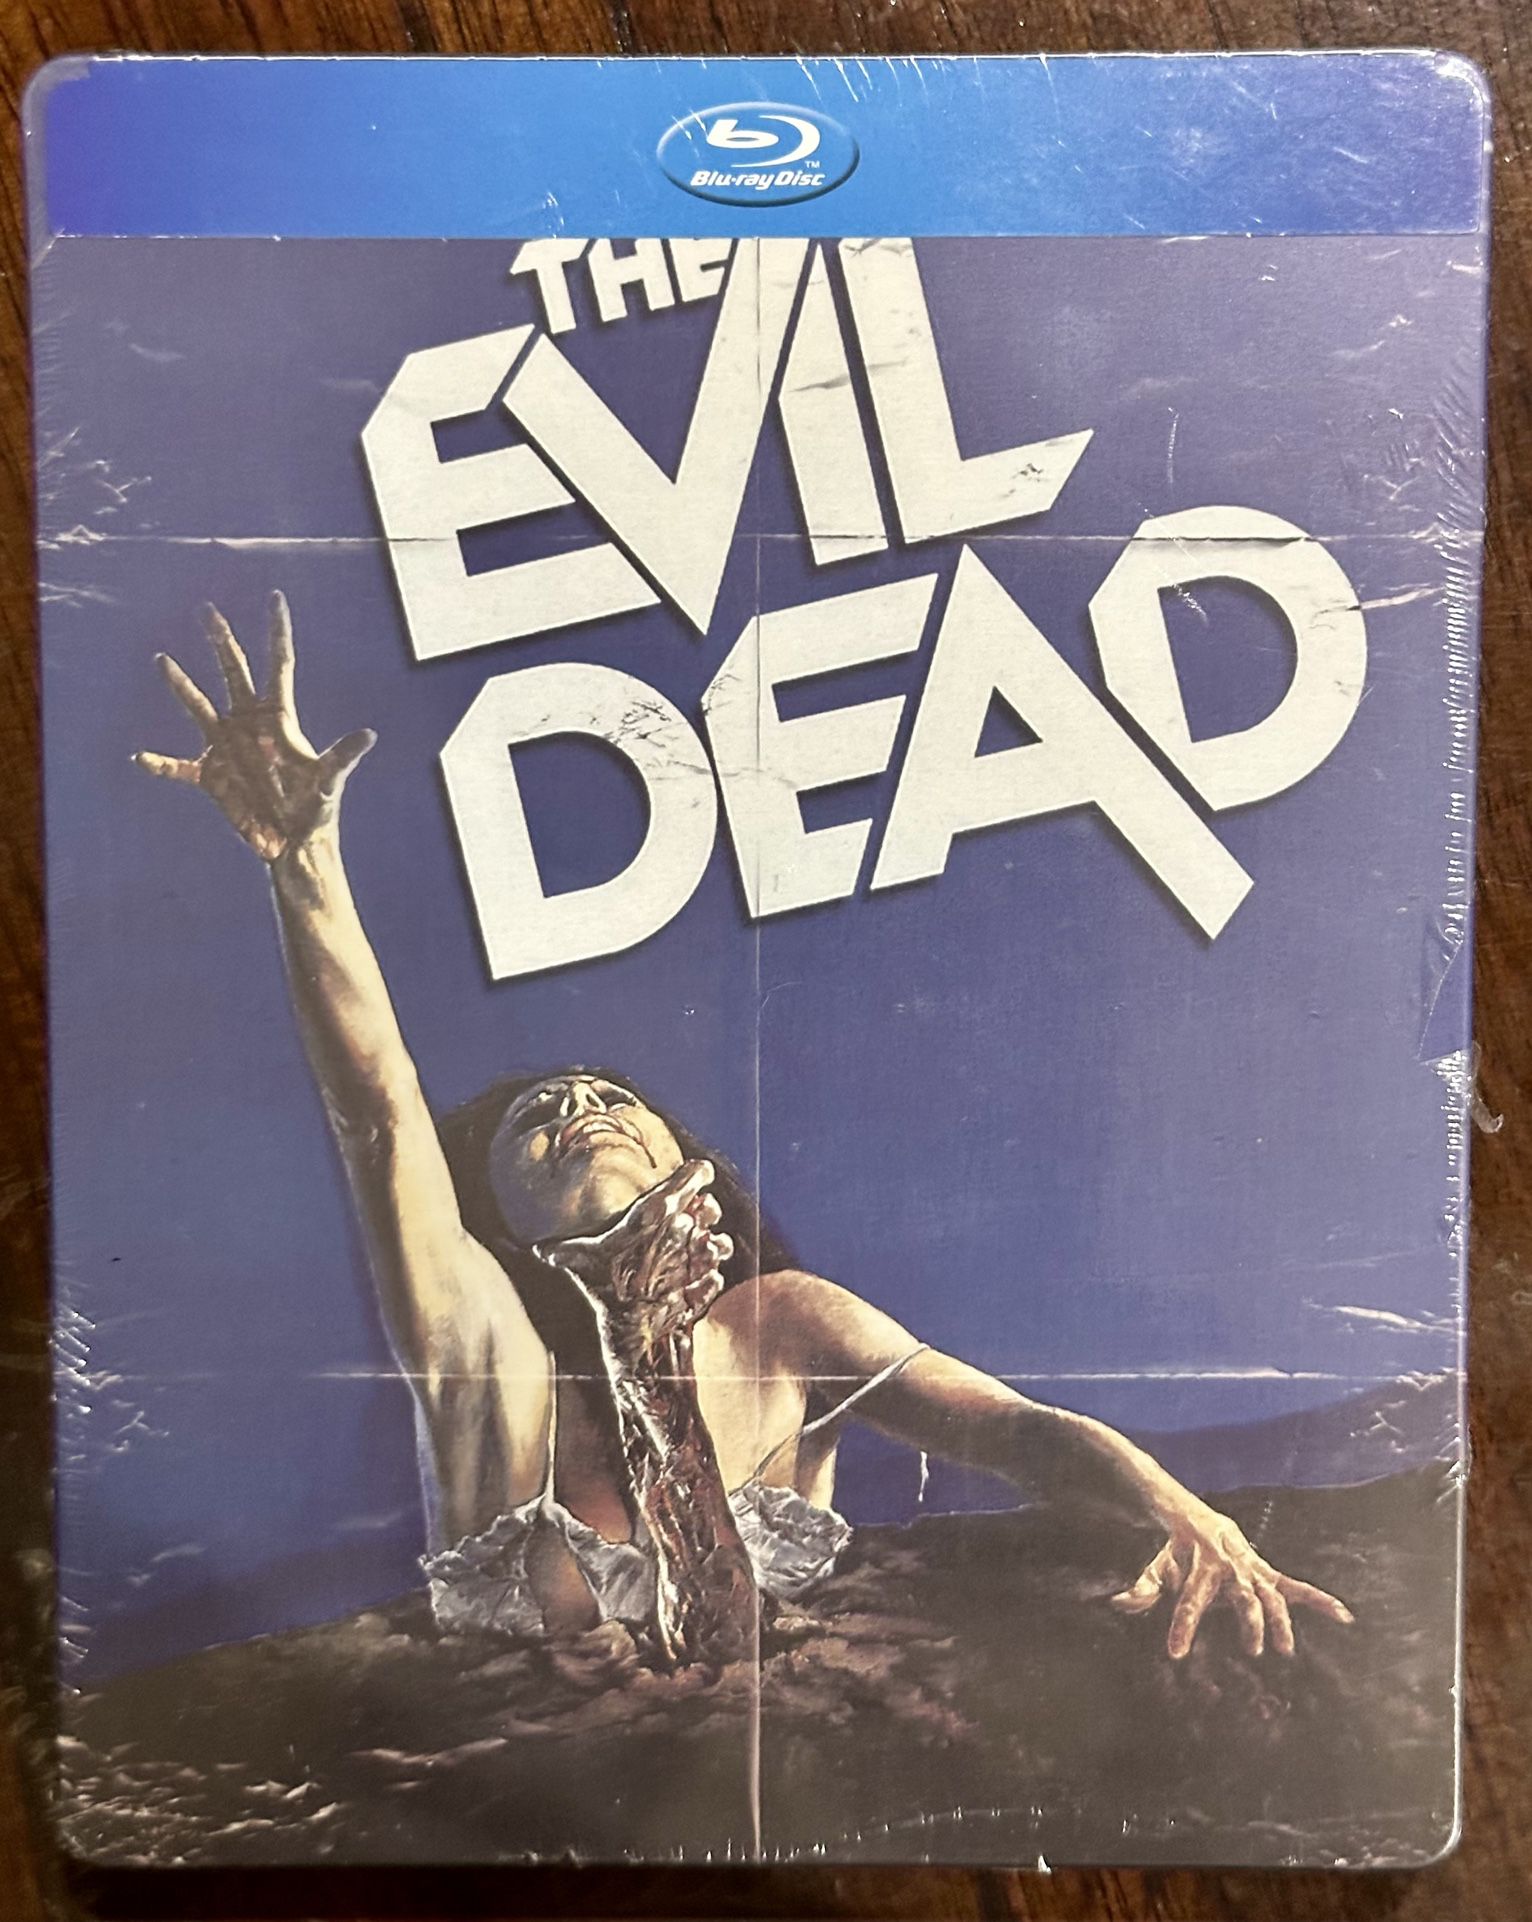 The Evil Dead (Blu-ray) Limited Edition Collector's STEELBOOK! BRAND NEW!